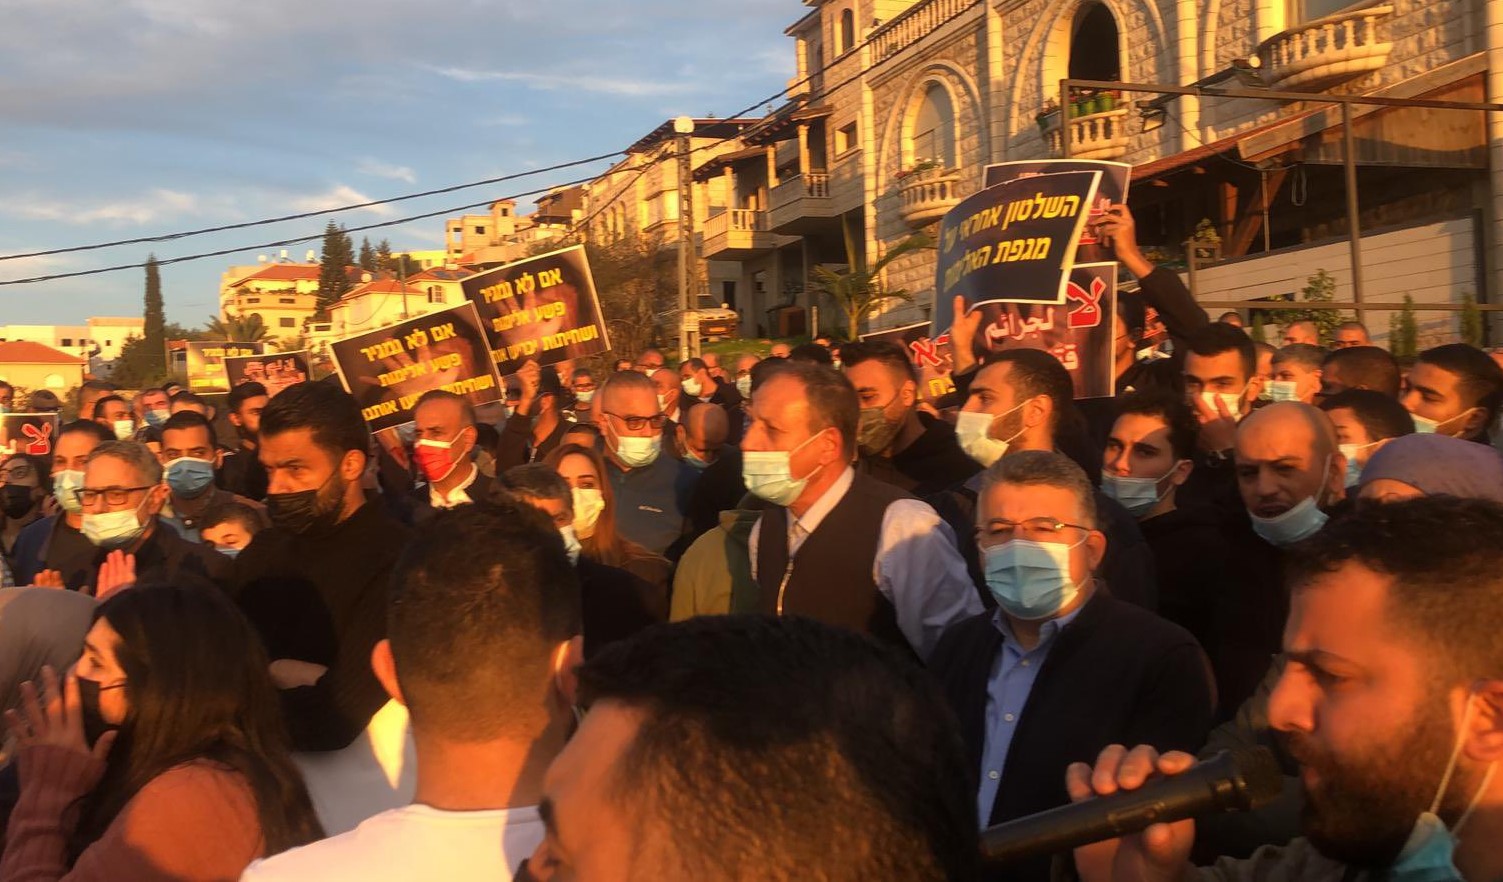 Hundreds of protestors marched in Umm al-Fahm a day after the serious wounding of the former mayor of the city, Dr. Suleiman Aghbariah, on Thursday, January 7. Among the protestors was Hadash MK Youssef Jabareen (second from right, wearing glasses) a resident of the city.